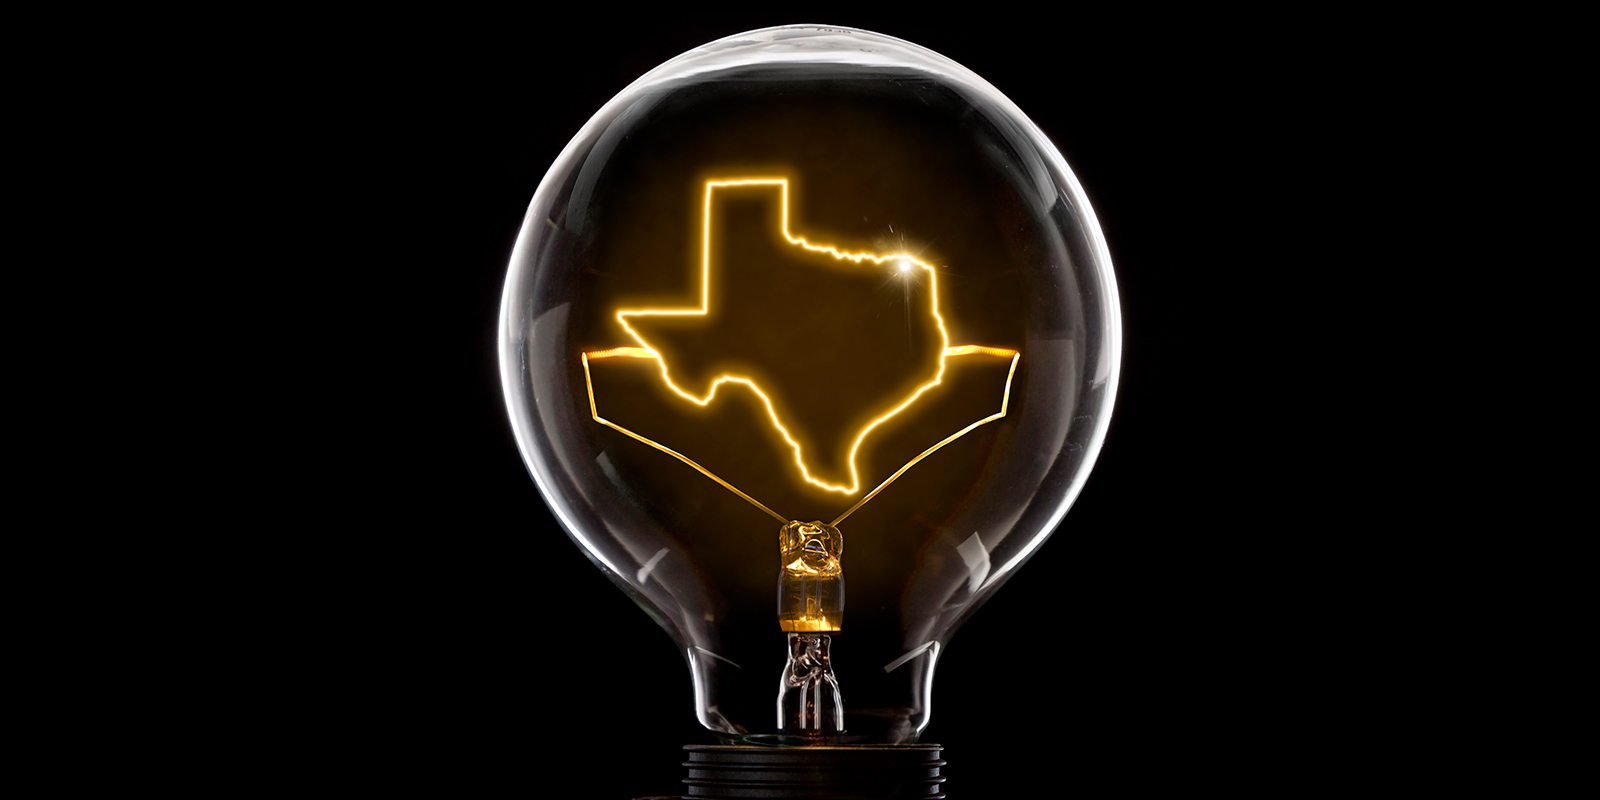 Lightbulb with a Texas-shaped filament